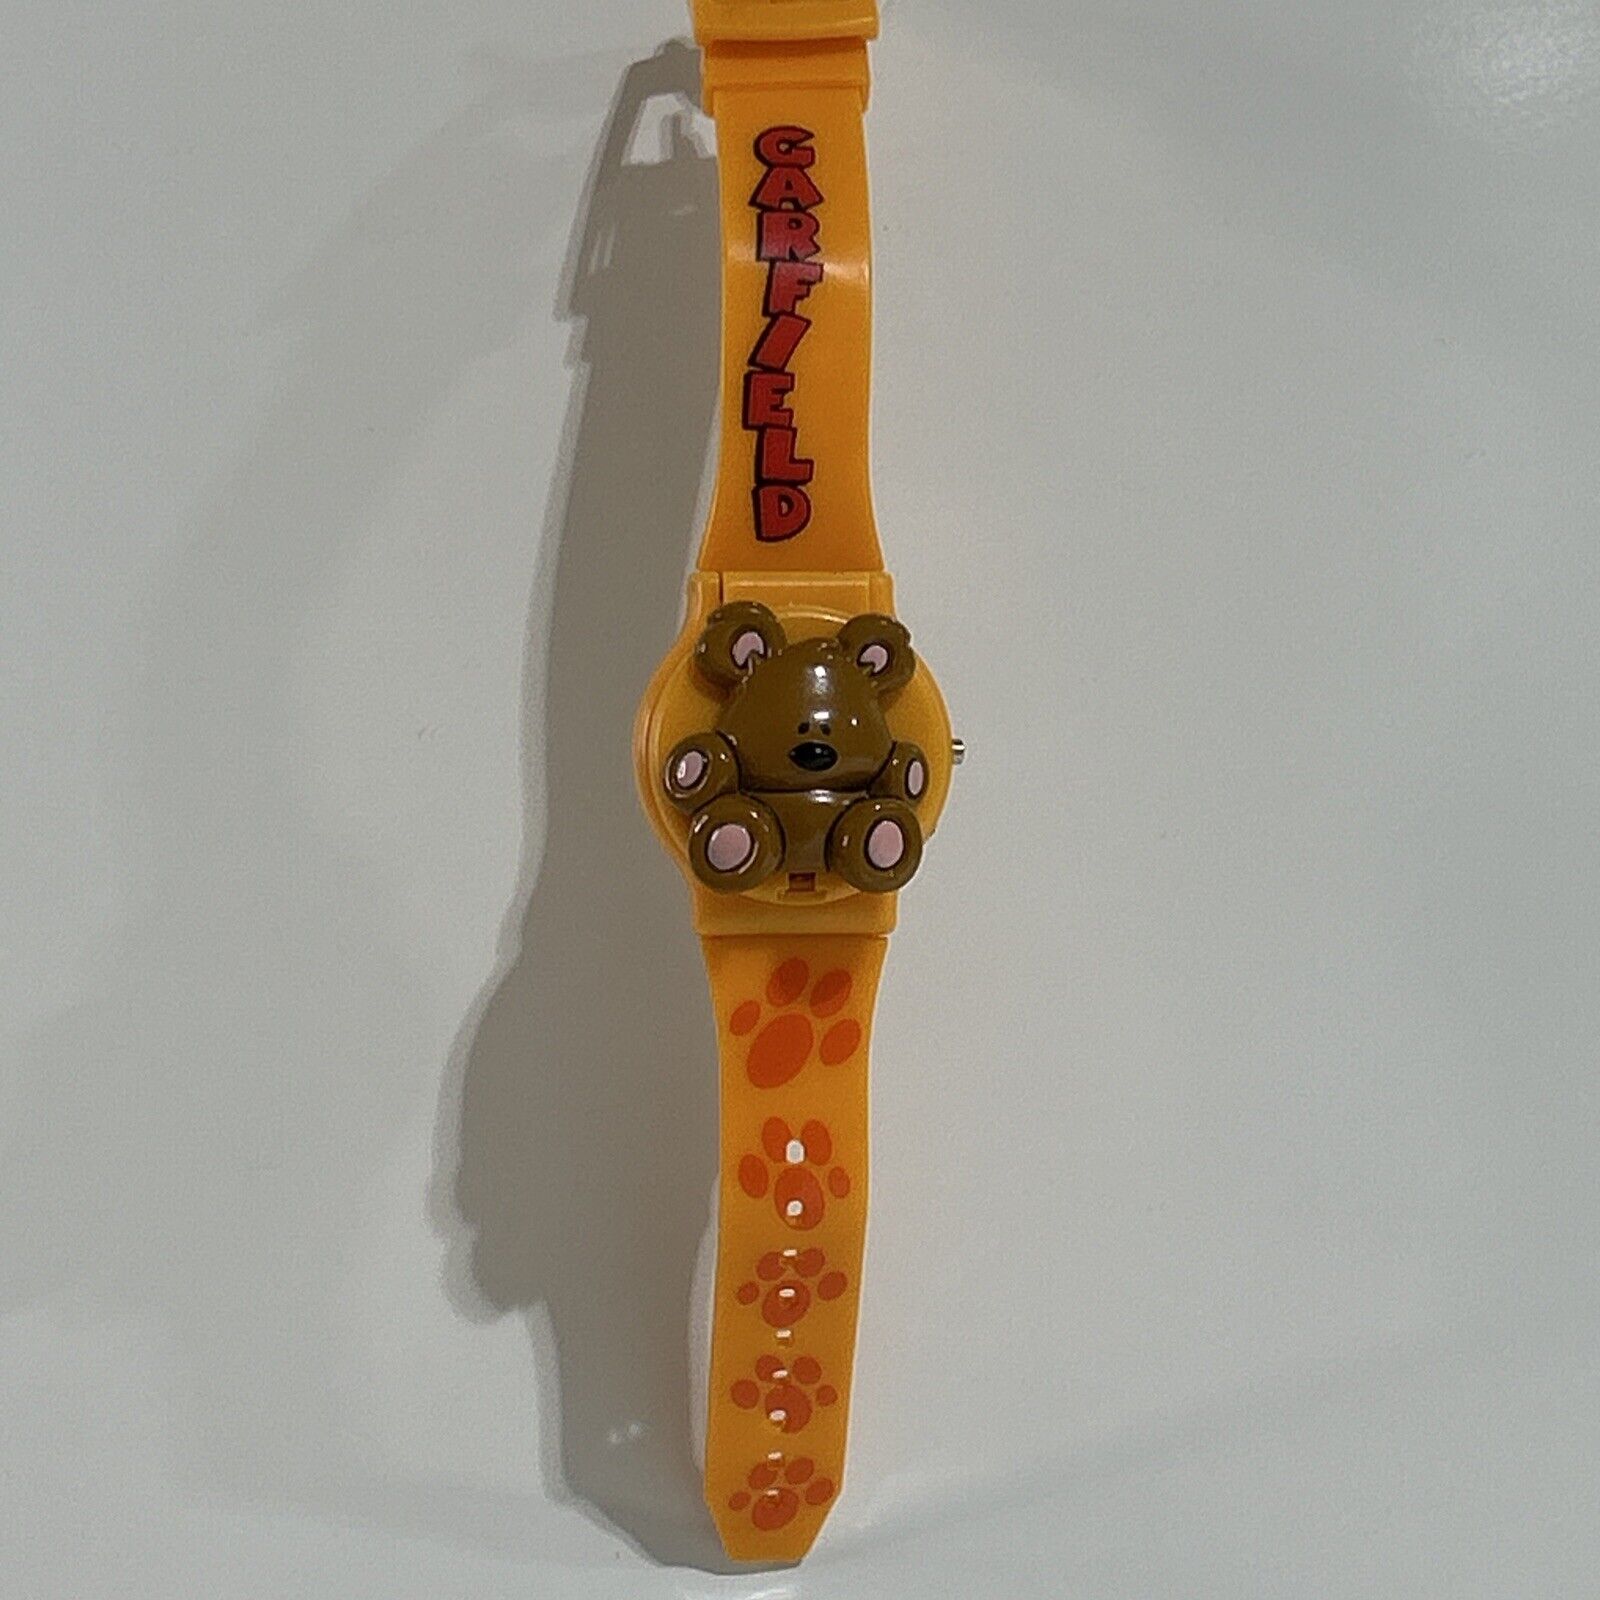 Garfield The Cat Pooky Character Digital Watch by Armitron Vintage NEEDS BATTERY